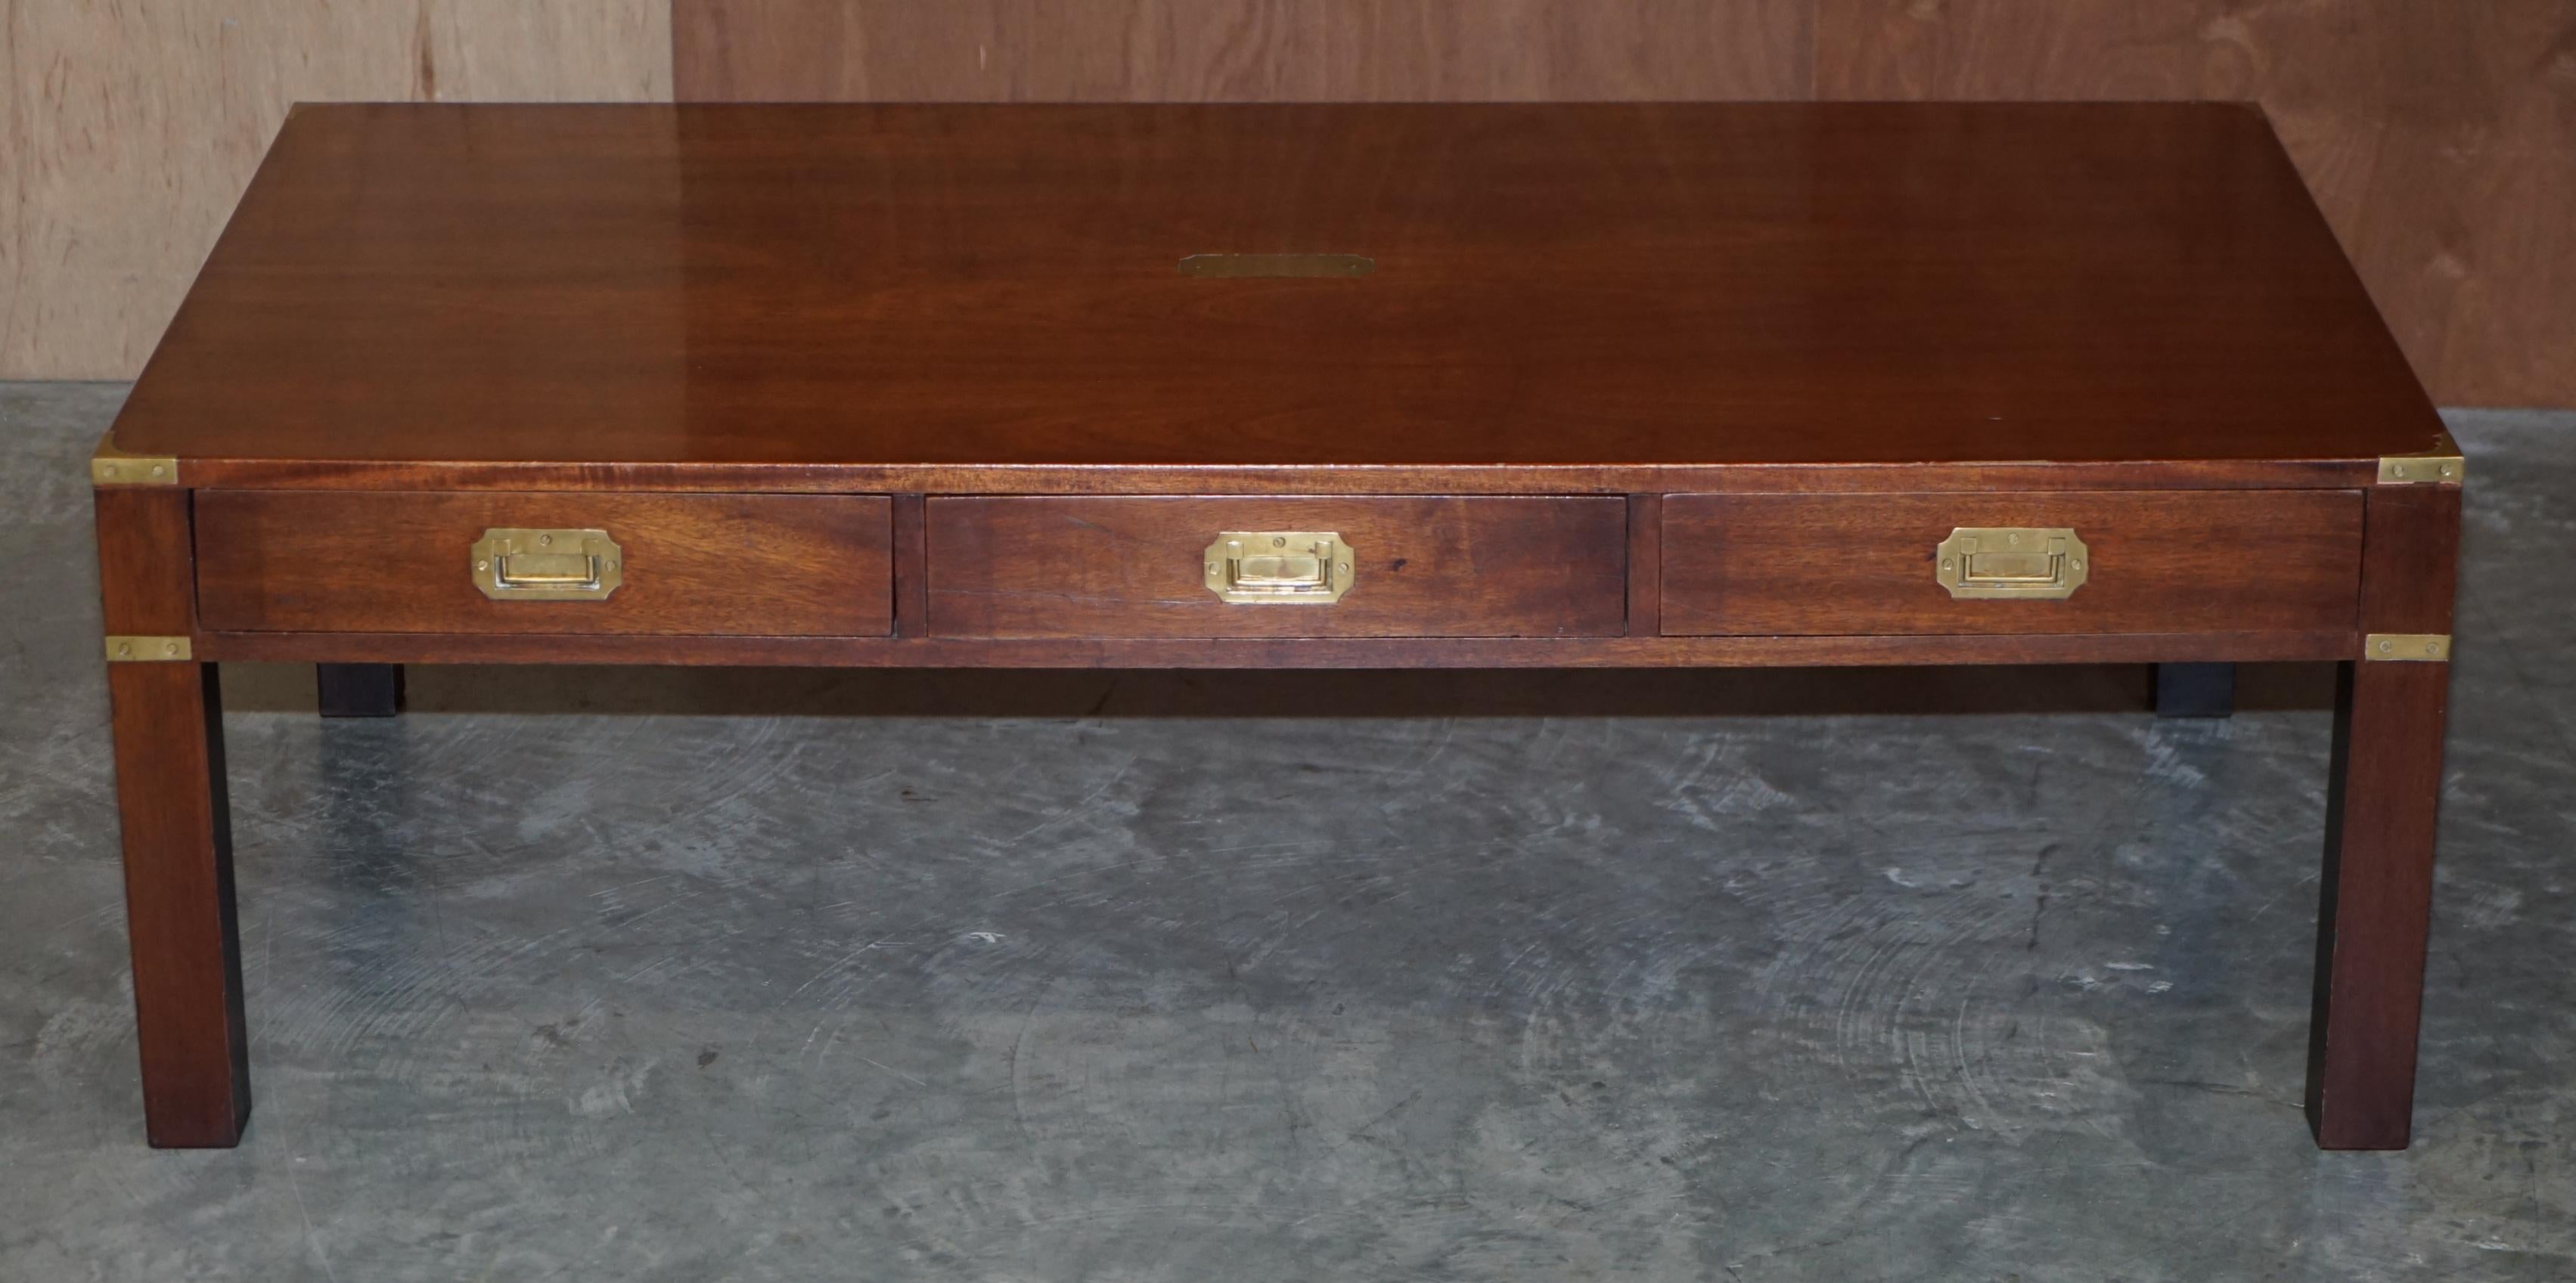 We are delighted to offer for sale this very large Harrods London Military Campaign three drawer coffee table made by Kennedy.

This piece was sold through Harrods, it was made by Kennedy who were Harrods oldest concession, they retailed with them